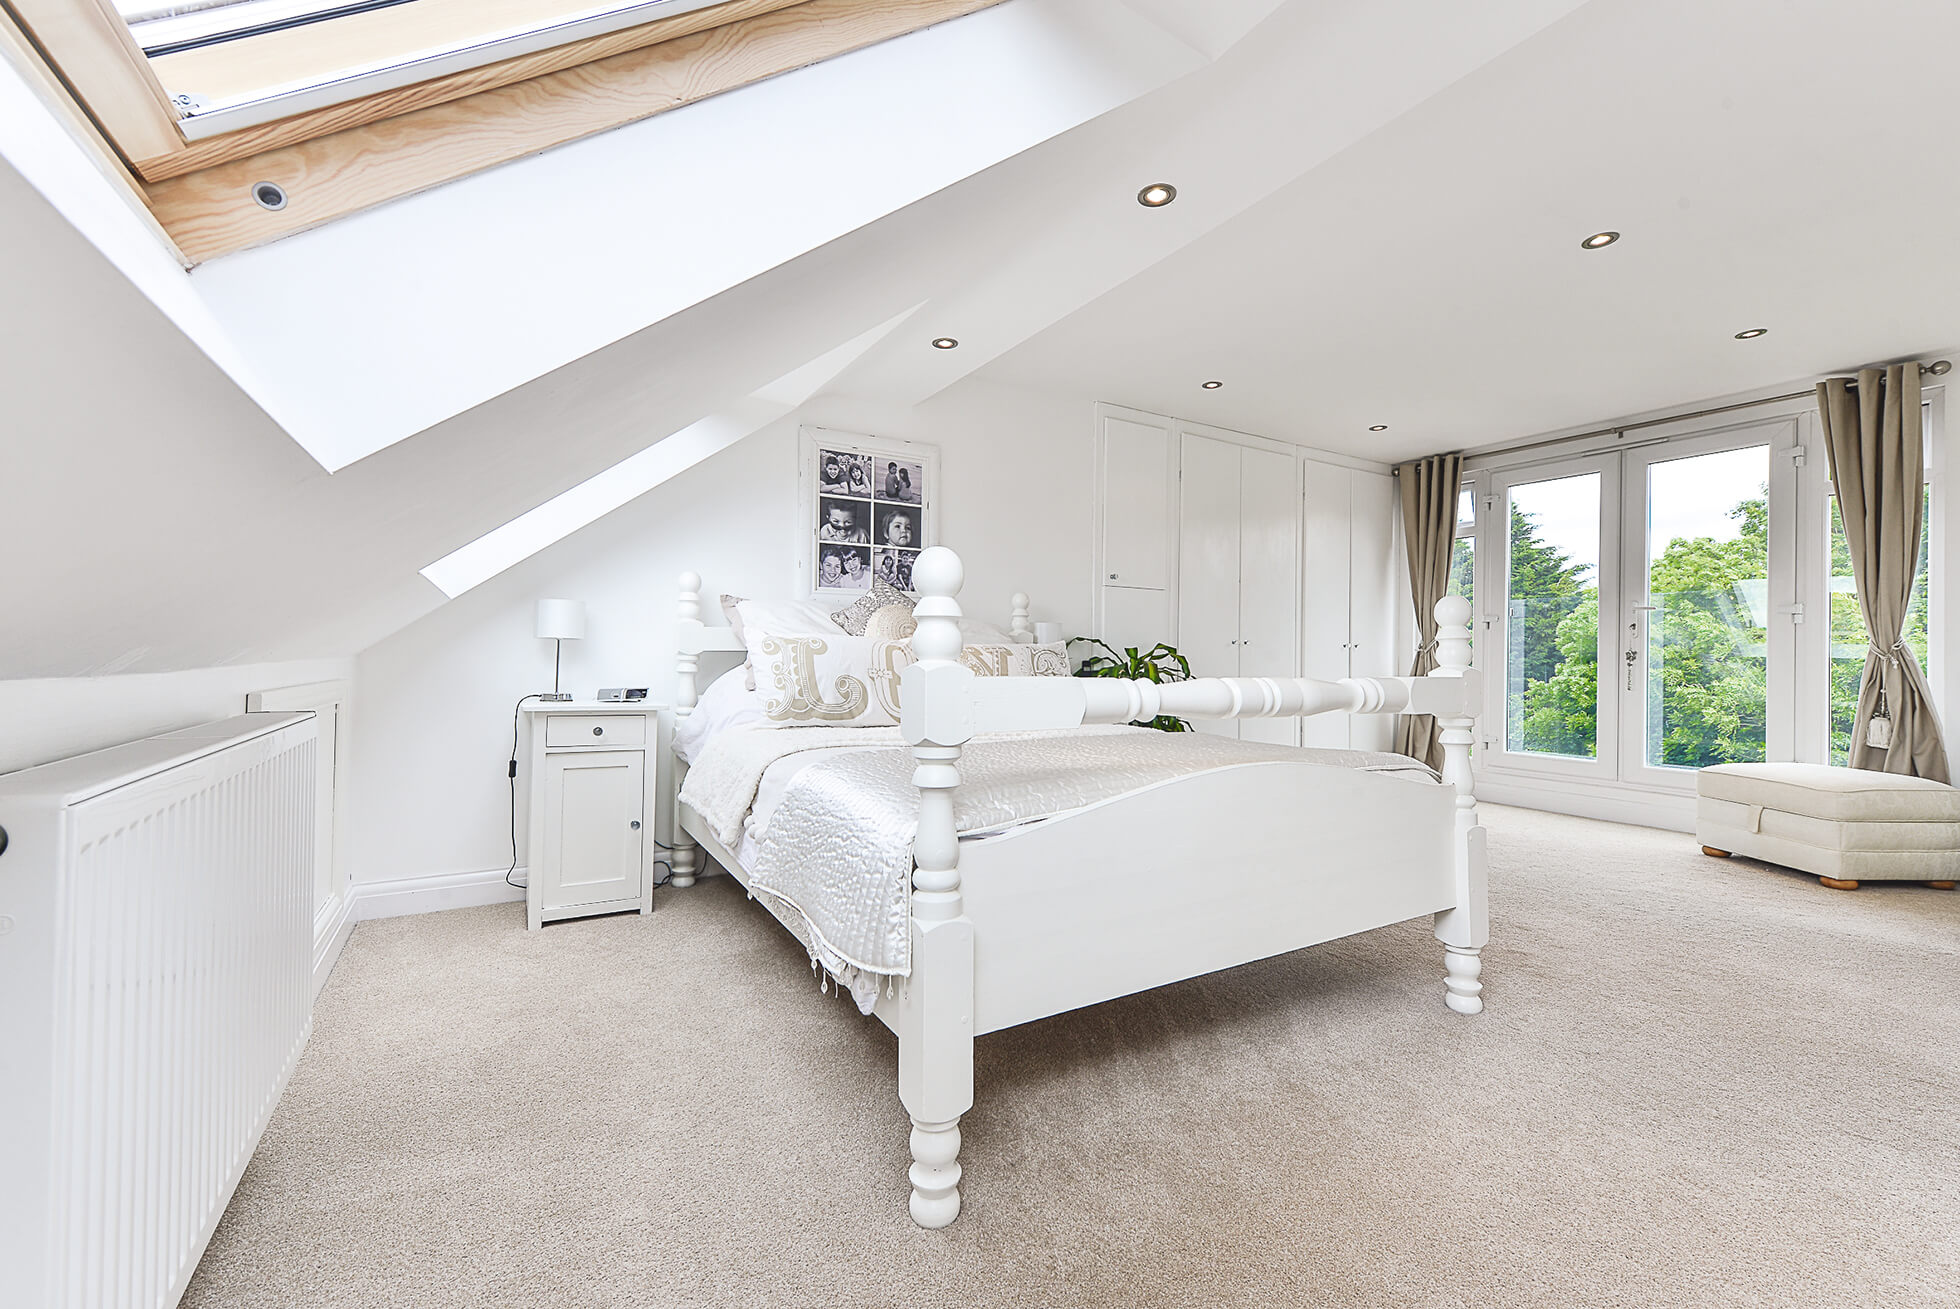 Do you have a question about converting your Loft in Sacombe? Here are the most popular questions asked by our clients.